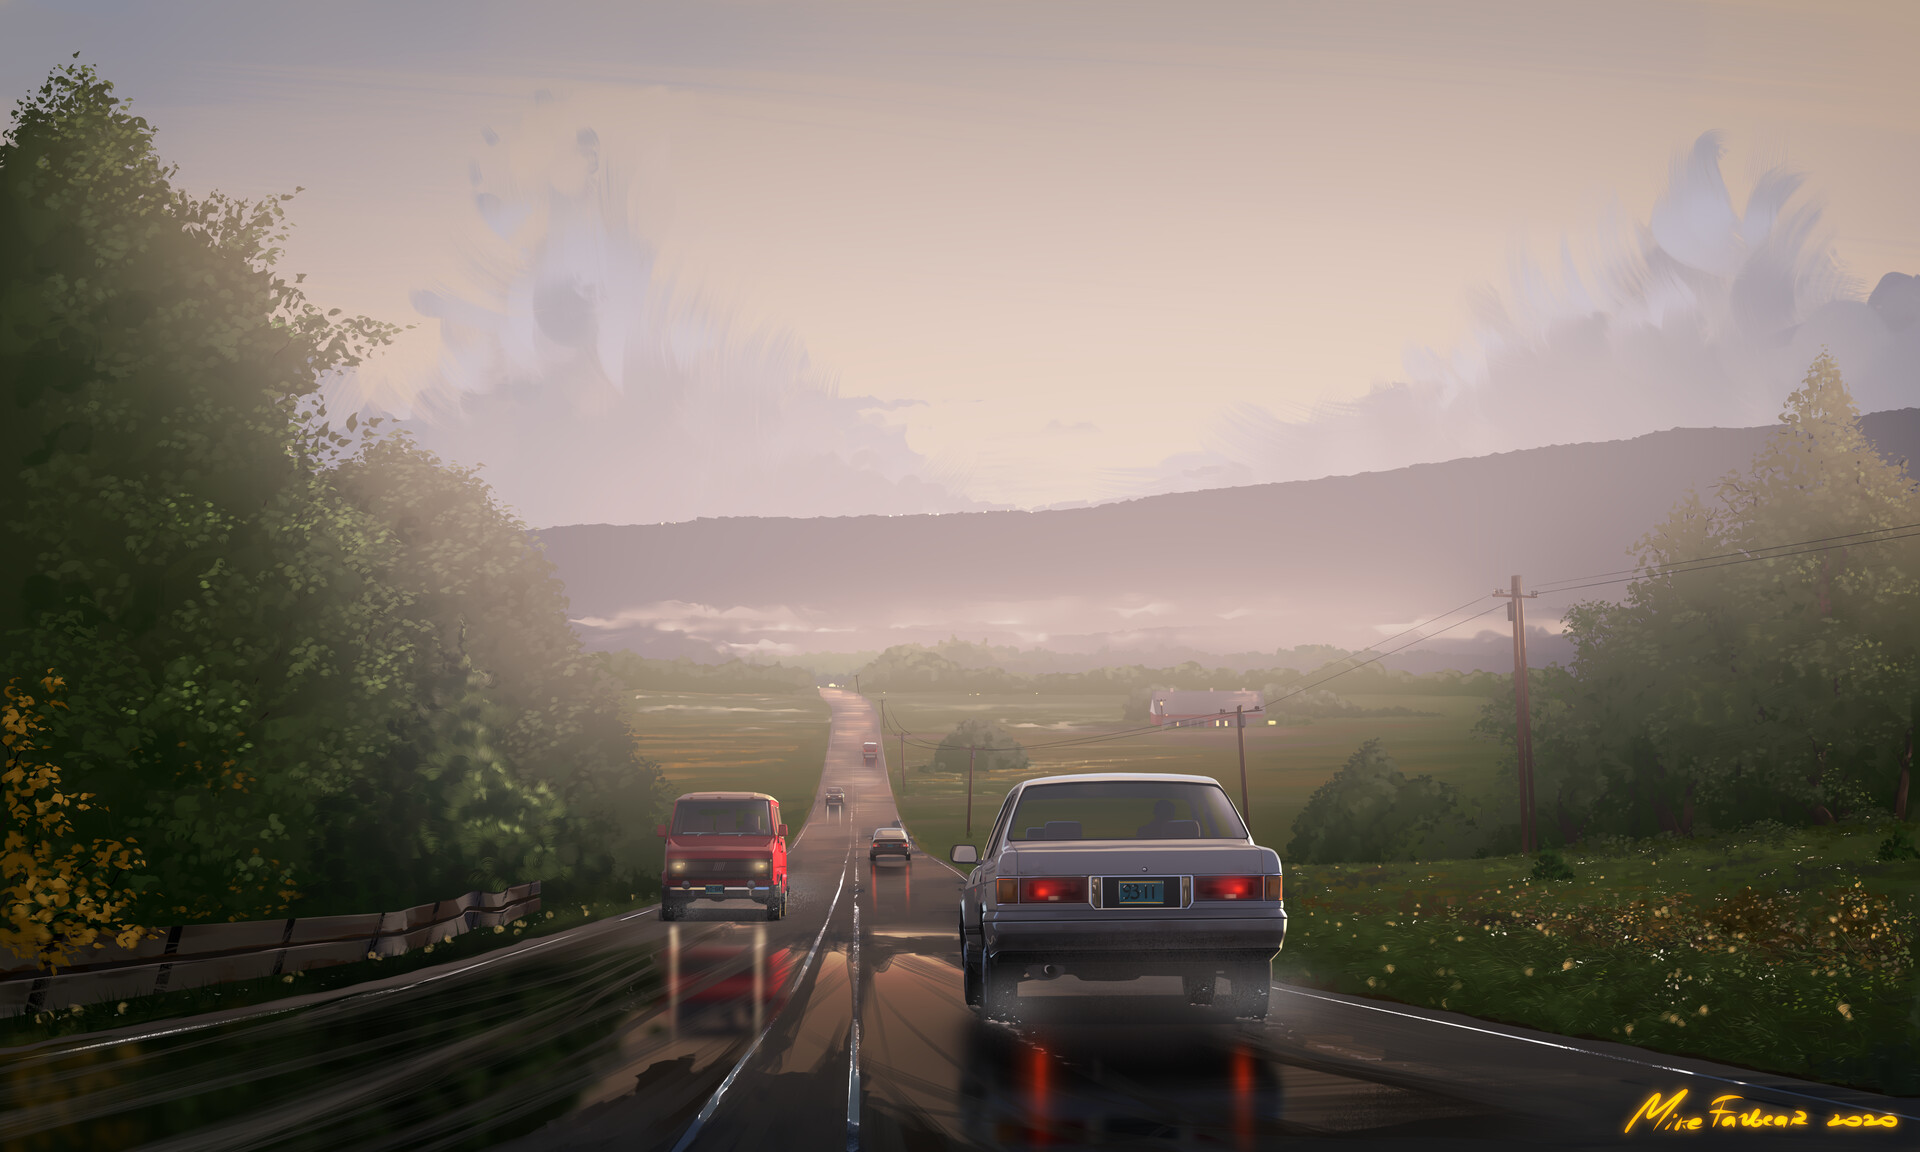 General 1920x1152 road mountains clouds trees car Mike Fazbear ArtStation utility pole van sky headlights taillights driving reflection signature